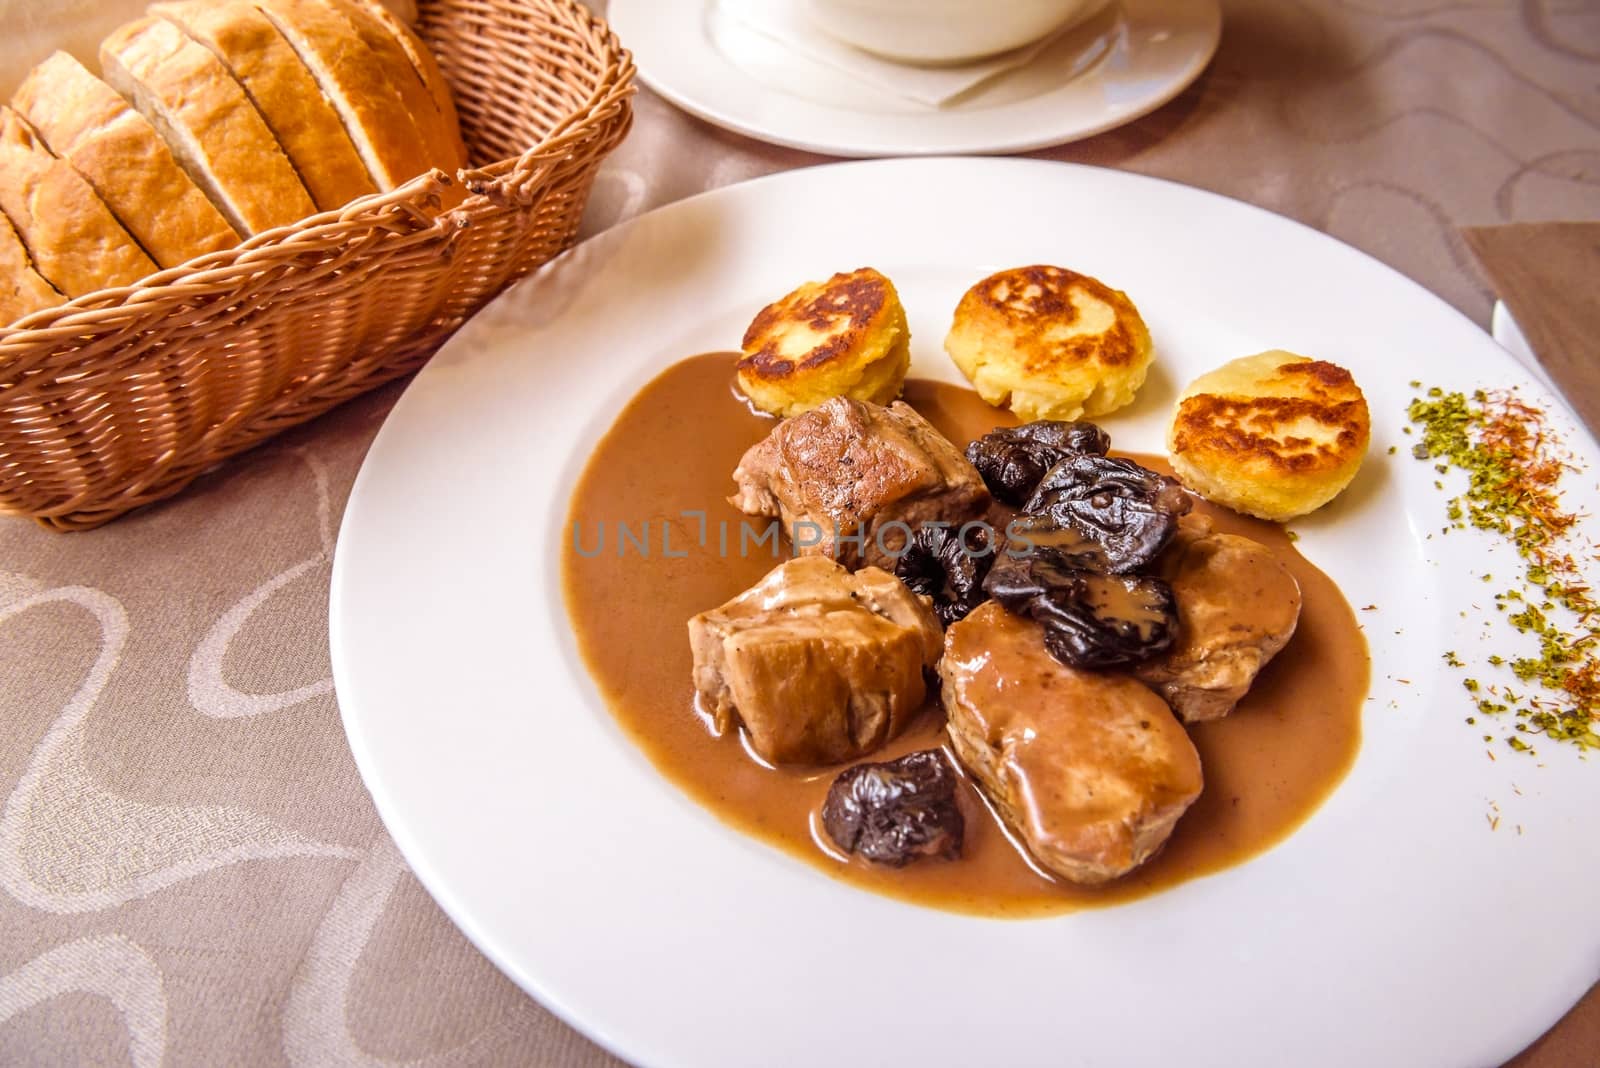 Slovenian dish from Ljubljana, delicious pork meat with plum brandy sauce and dried plums, and baked dodole as a side dish, called Zganjarsko.